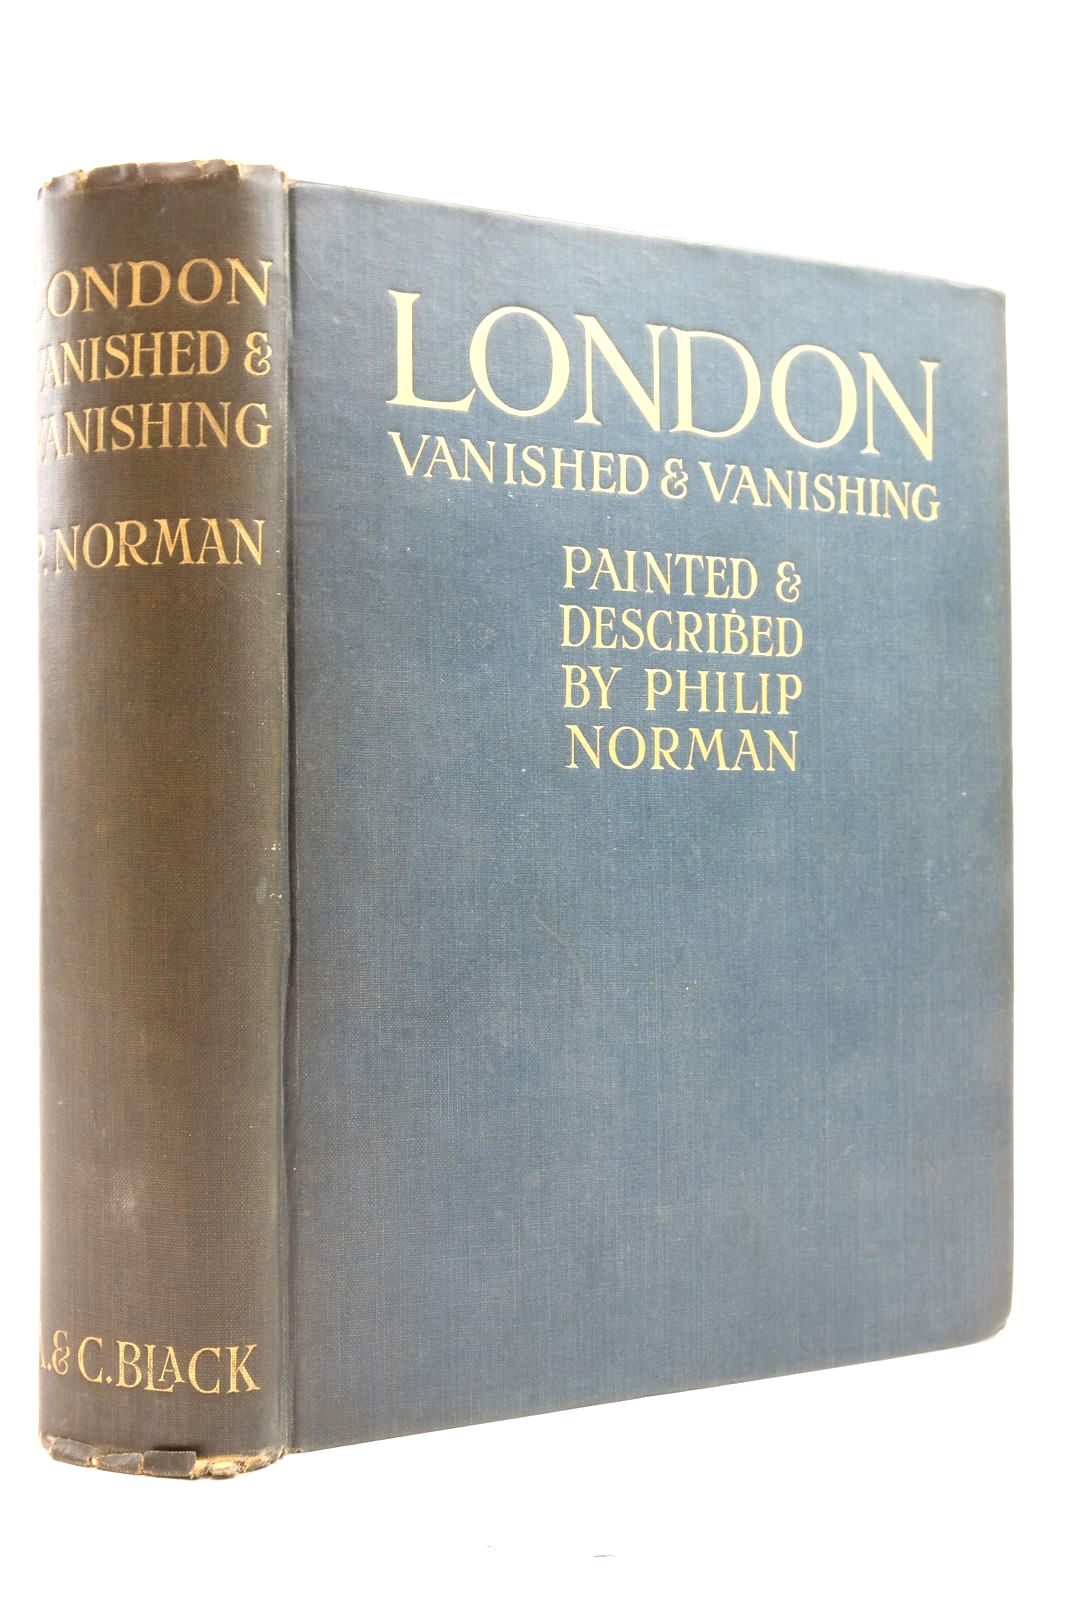 Photo of LONDON VANISHED & VANISHING written by Norman, Philip illustrated by Norman, Philip published by Adam &amp; Charles Black (STOCK CODE: 2137238)  for sale by Stella & Rose's Books